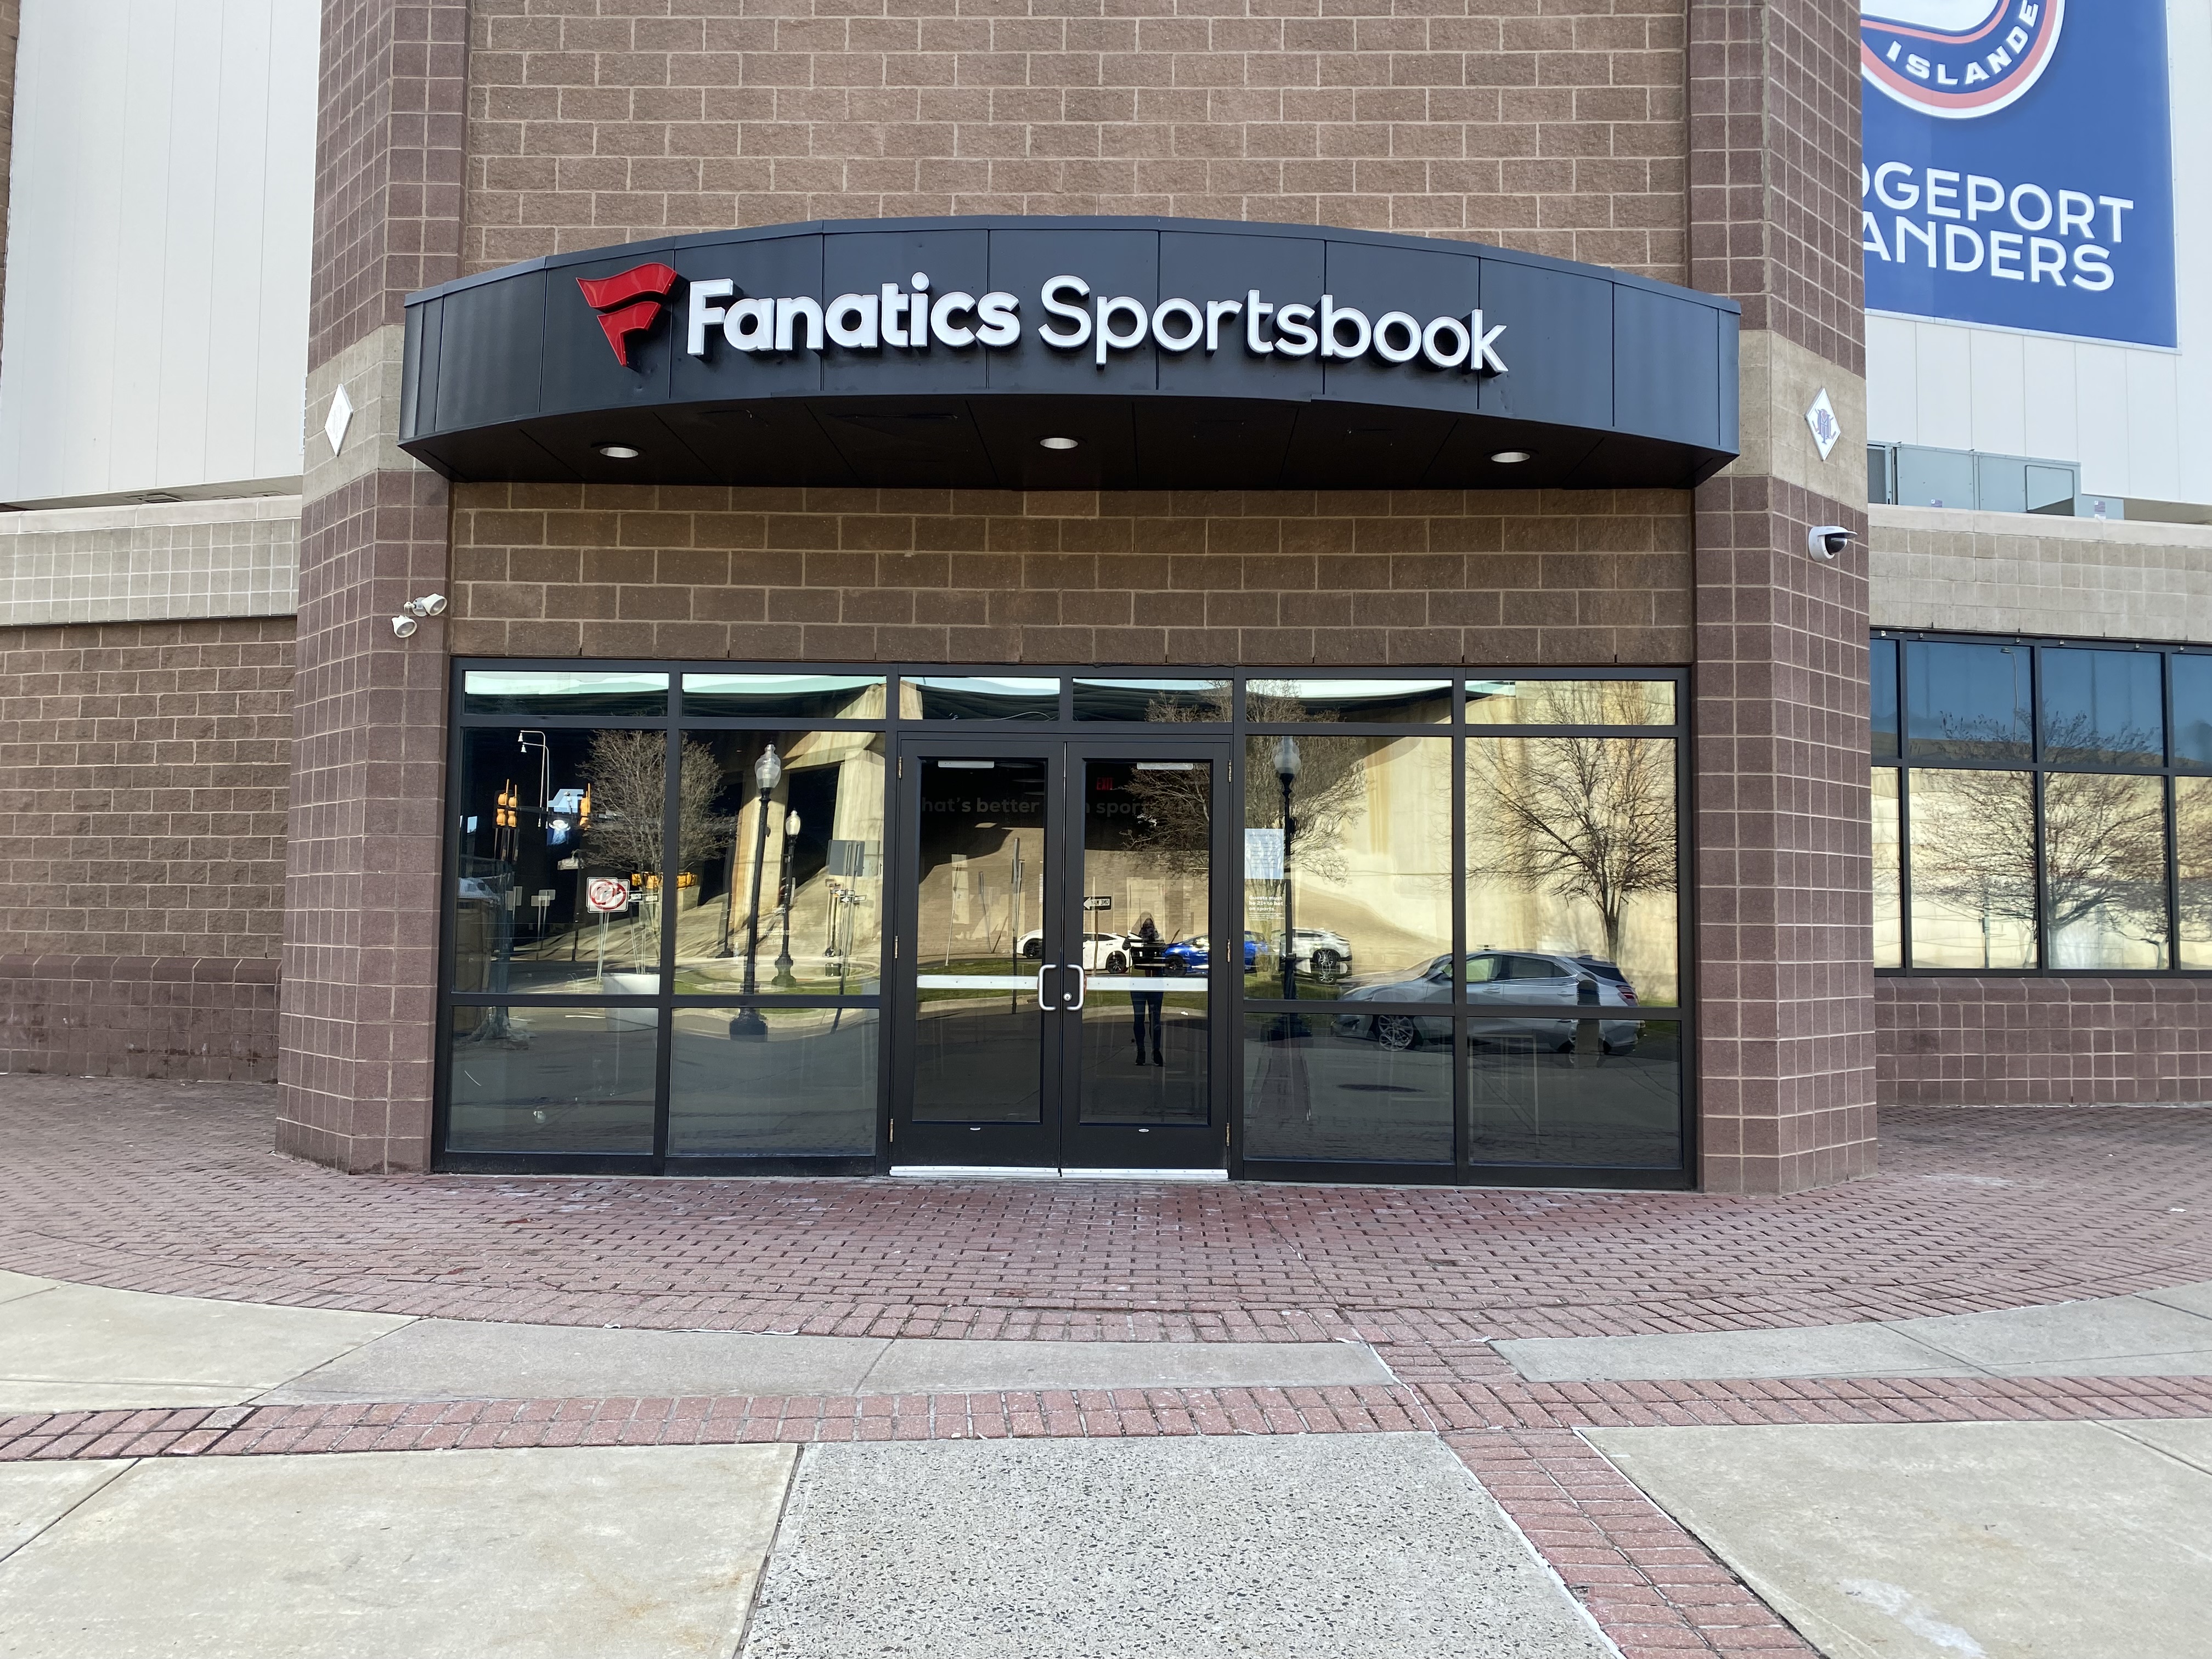 Opening today in Bridgeport, CT, The Connecticut Lottery in partnership with Fanatics Sportsbook is opening its 10th retail sports betting location in the state of Connecticut.